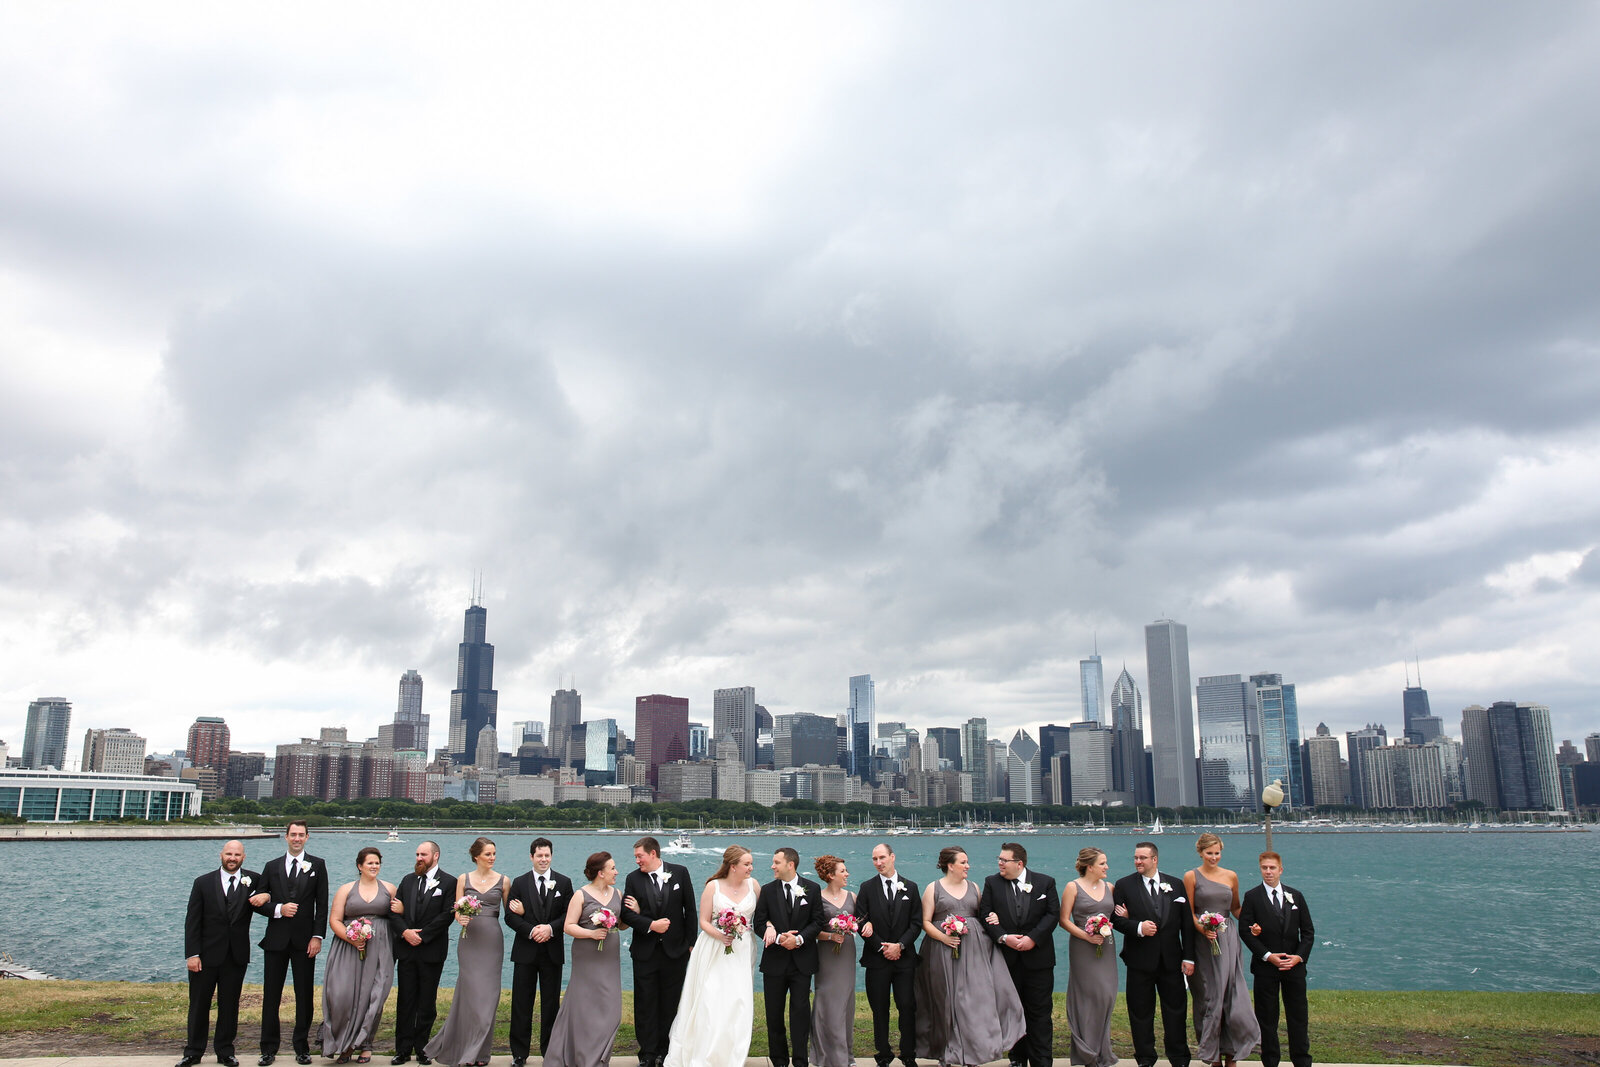 Bride and groom pose for portrait with their wedding party on the water with Chicago skyline in the background